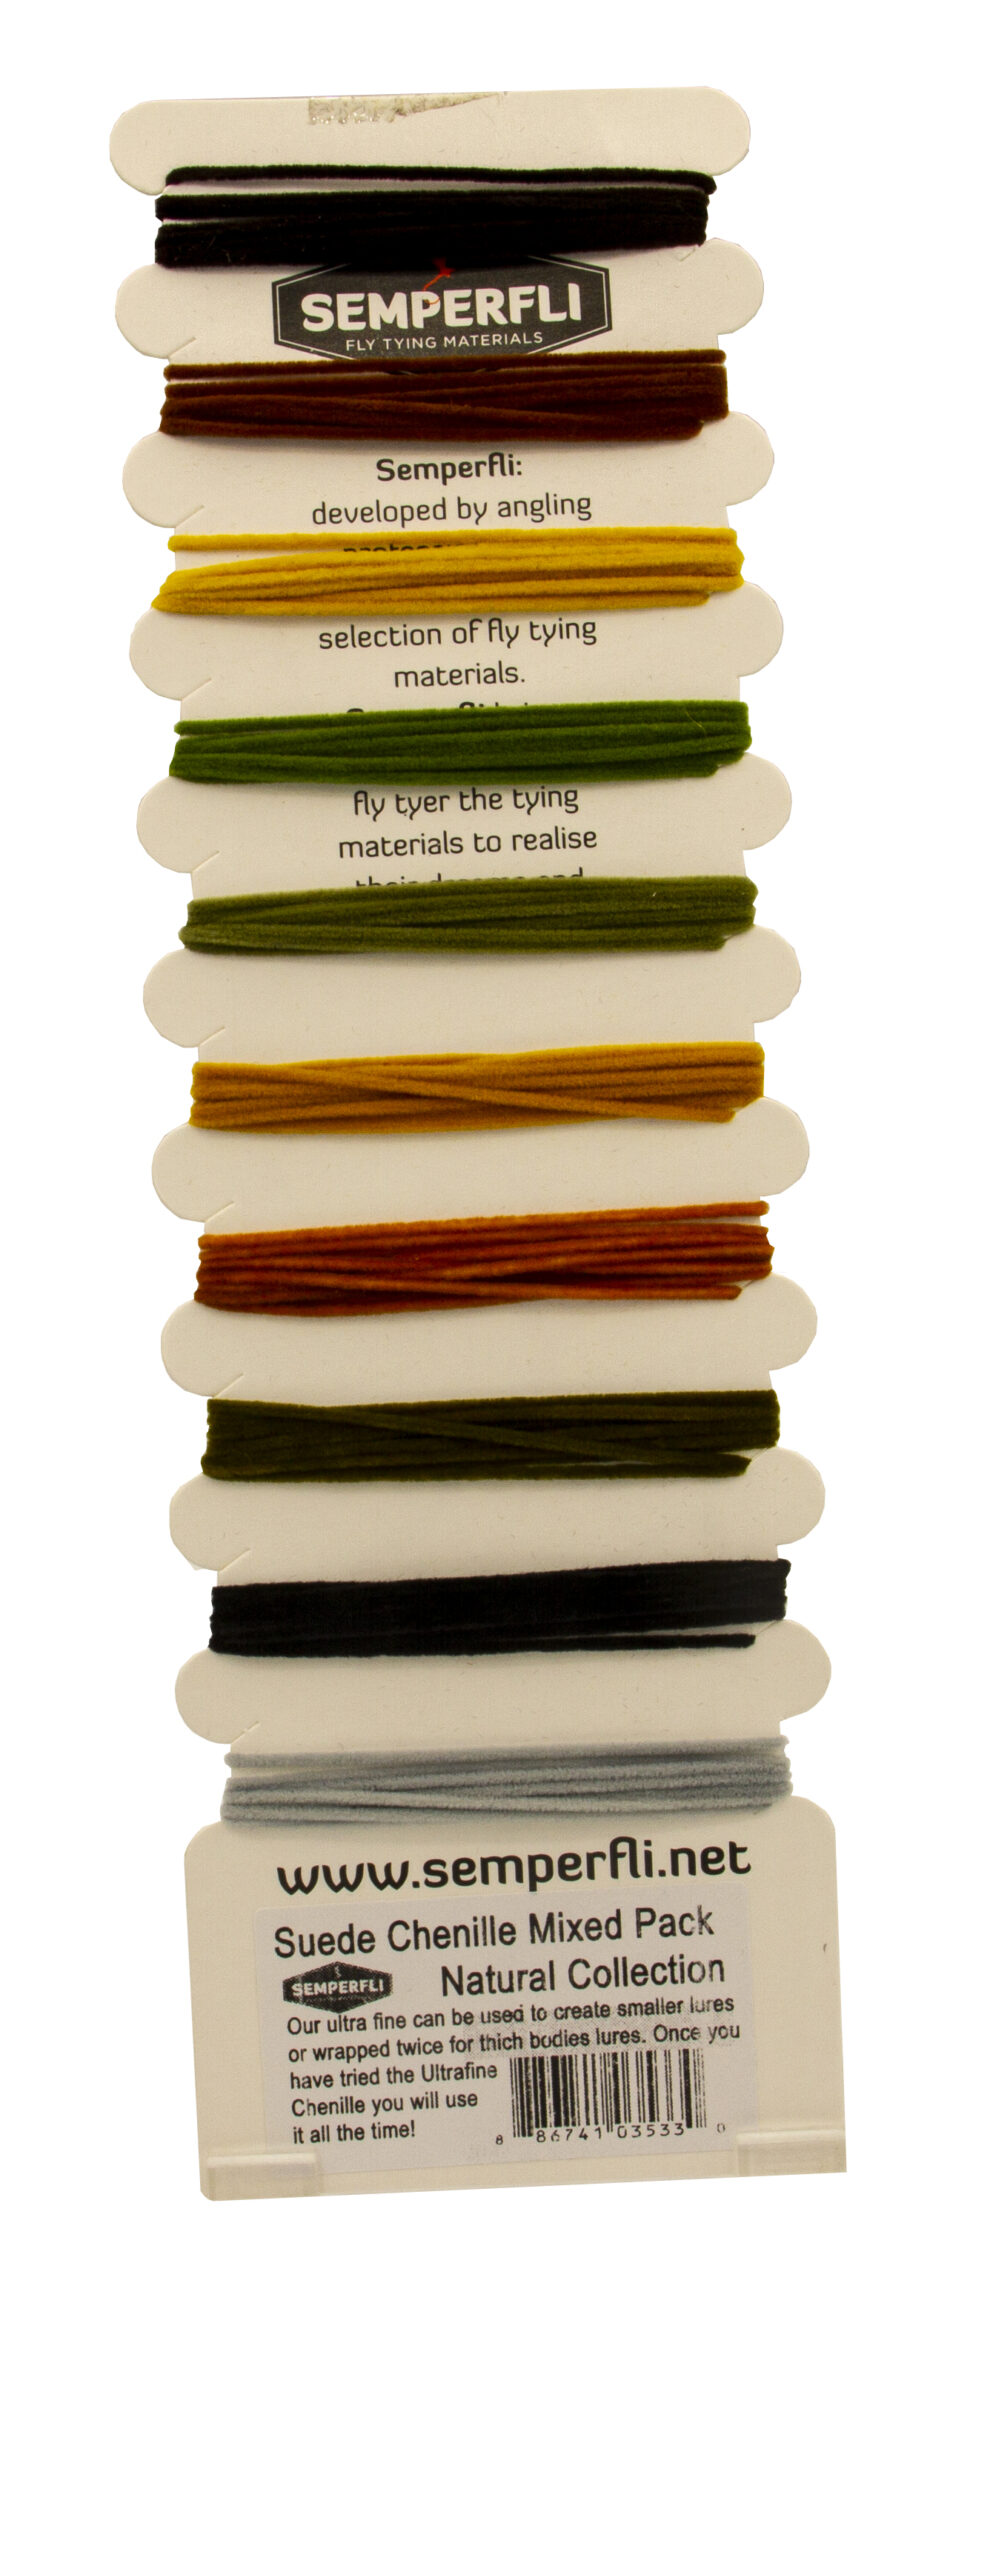 Semperfli Suede Chenille Mixed Pack Natural Collection